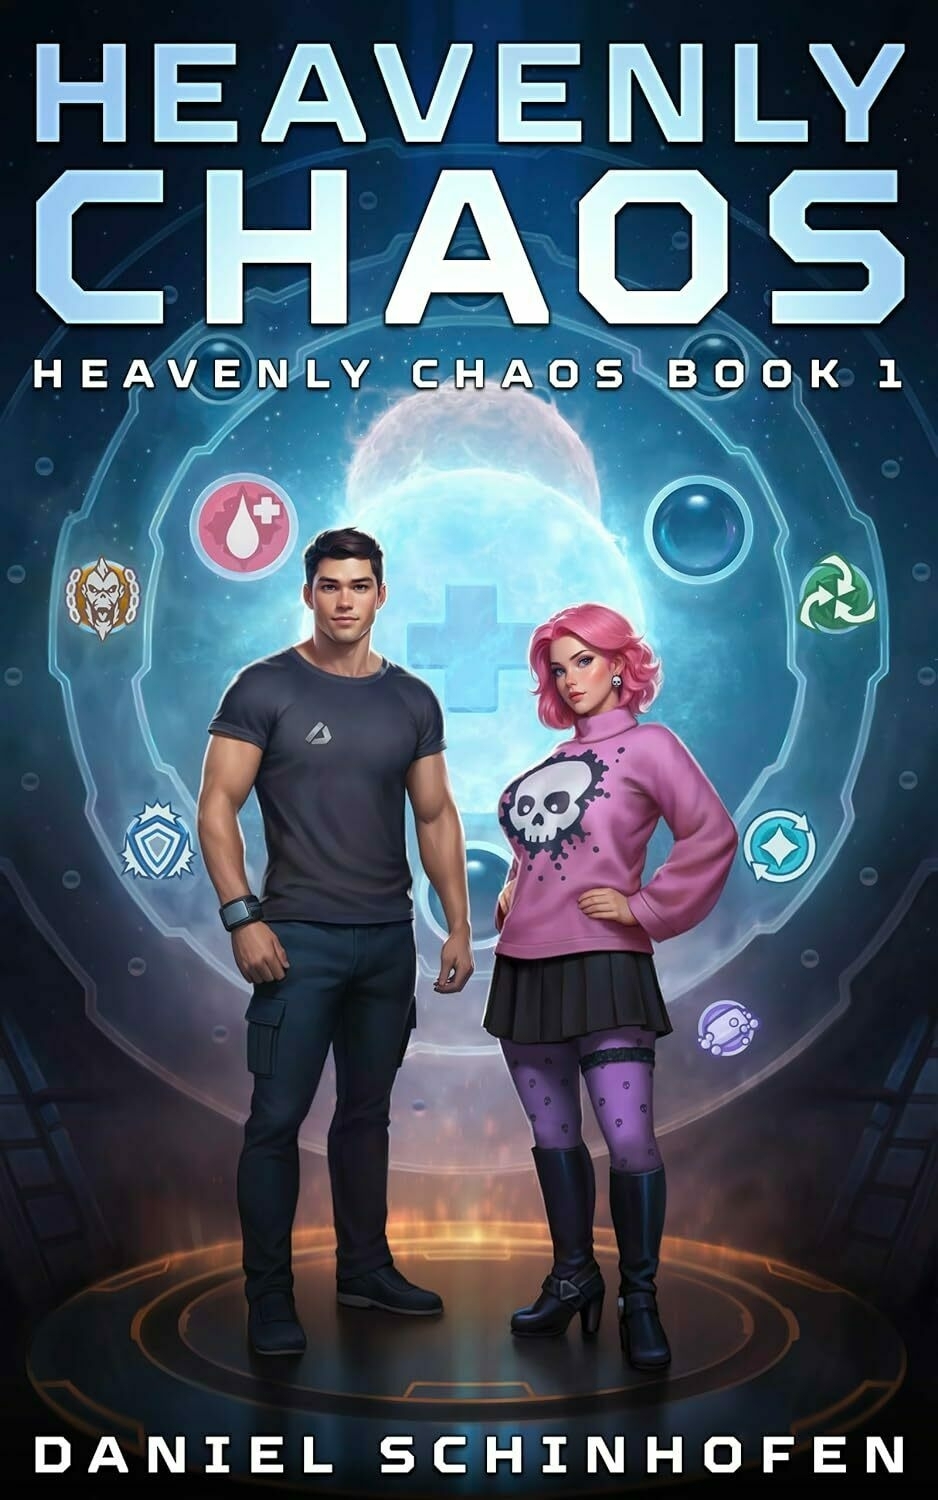 A man and a woman stand confidently against a cosmic backdrop with symbols around them. Text: 'HEAVENLY CHAOS HEAVENLY CHAOS BOOK 1 - DANIEL SCHINHOFEN'.